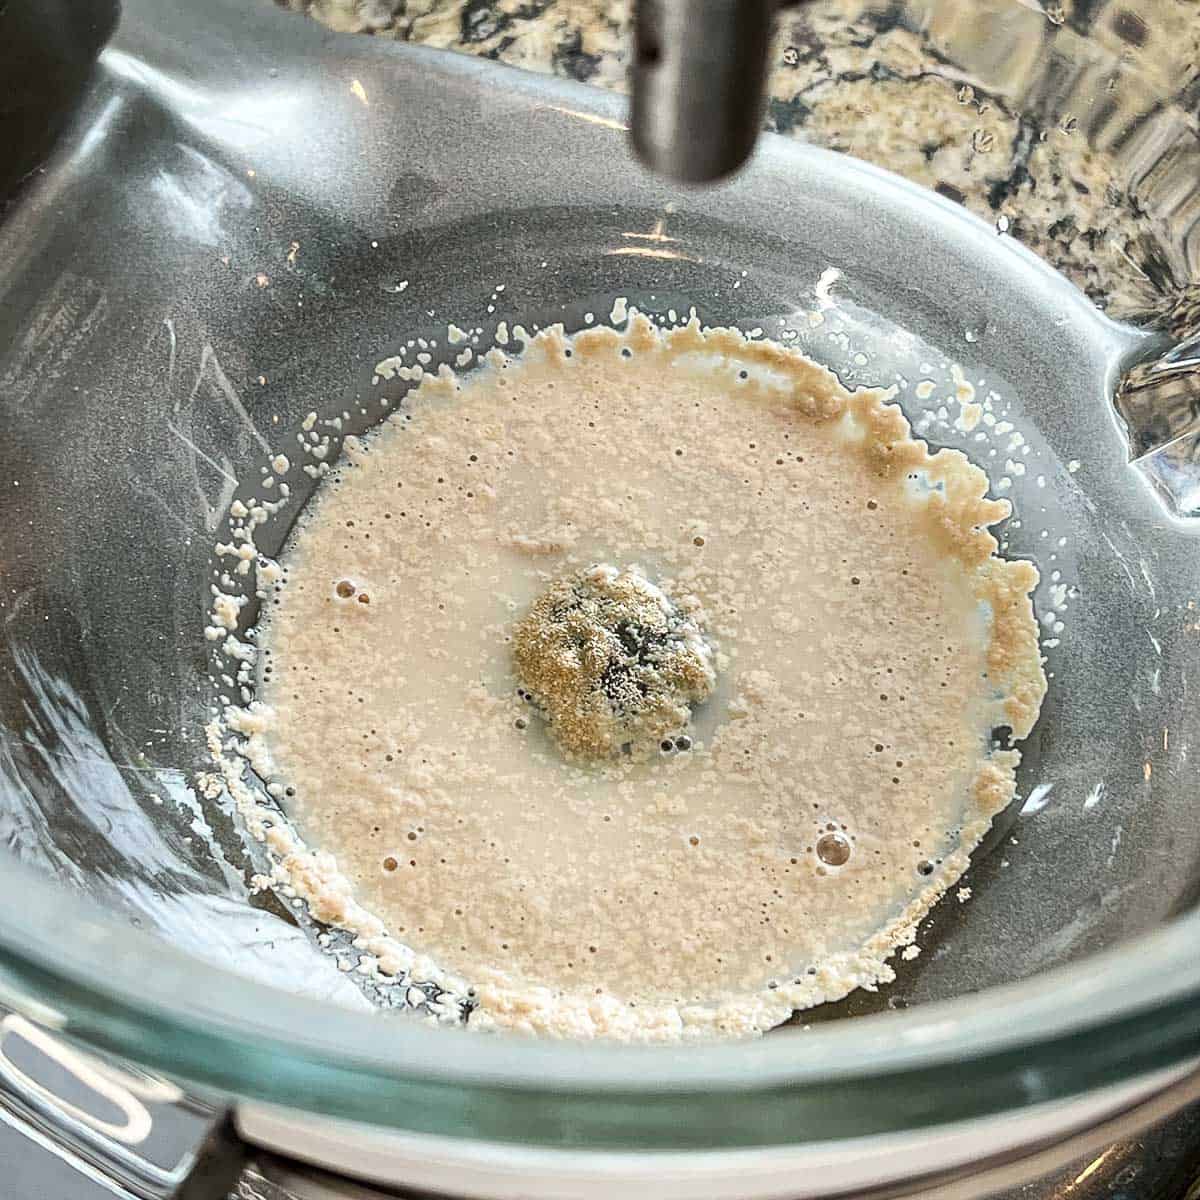 Image showing yeast being proofed in bowl.